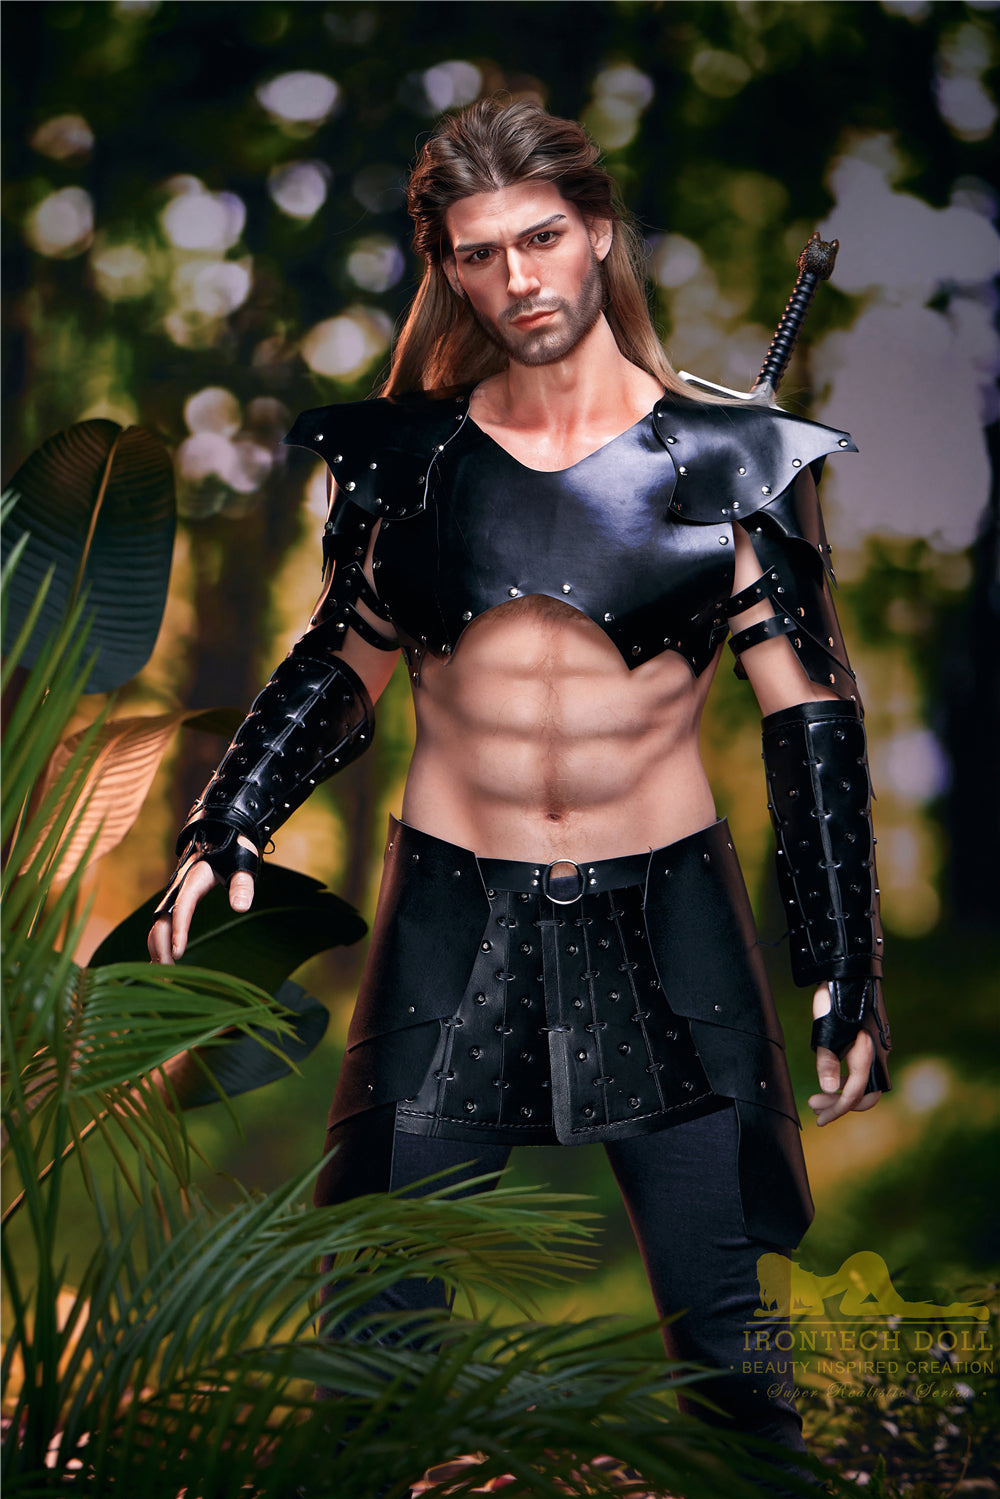 Irontech Doll 176 cm Silicone - Male Thomas | Buy Sex Dolls at DOLLS ACTUALLY